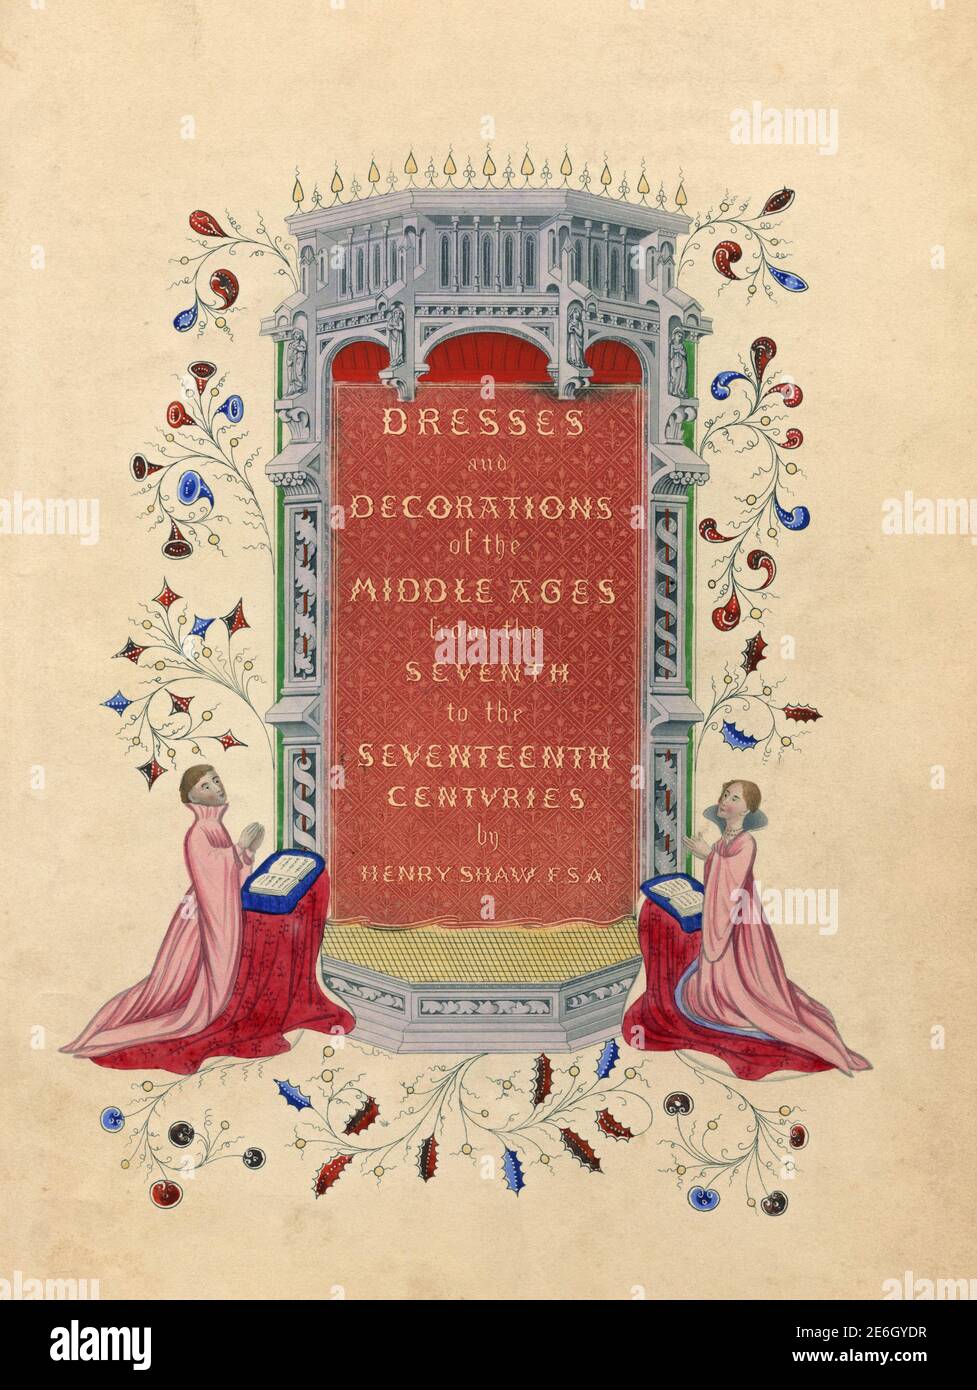 Cover of the book Dresses and decorations of the Middle Ages, print by British artist Henry Shaw, 1840s Stock Photo